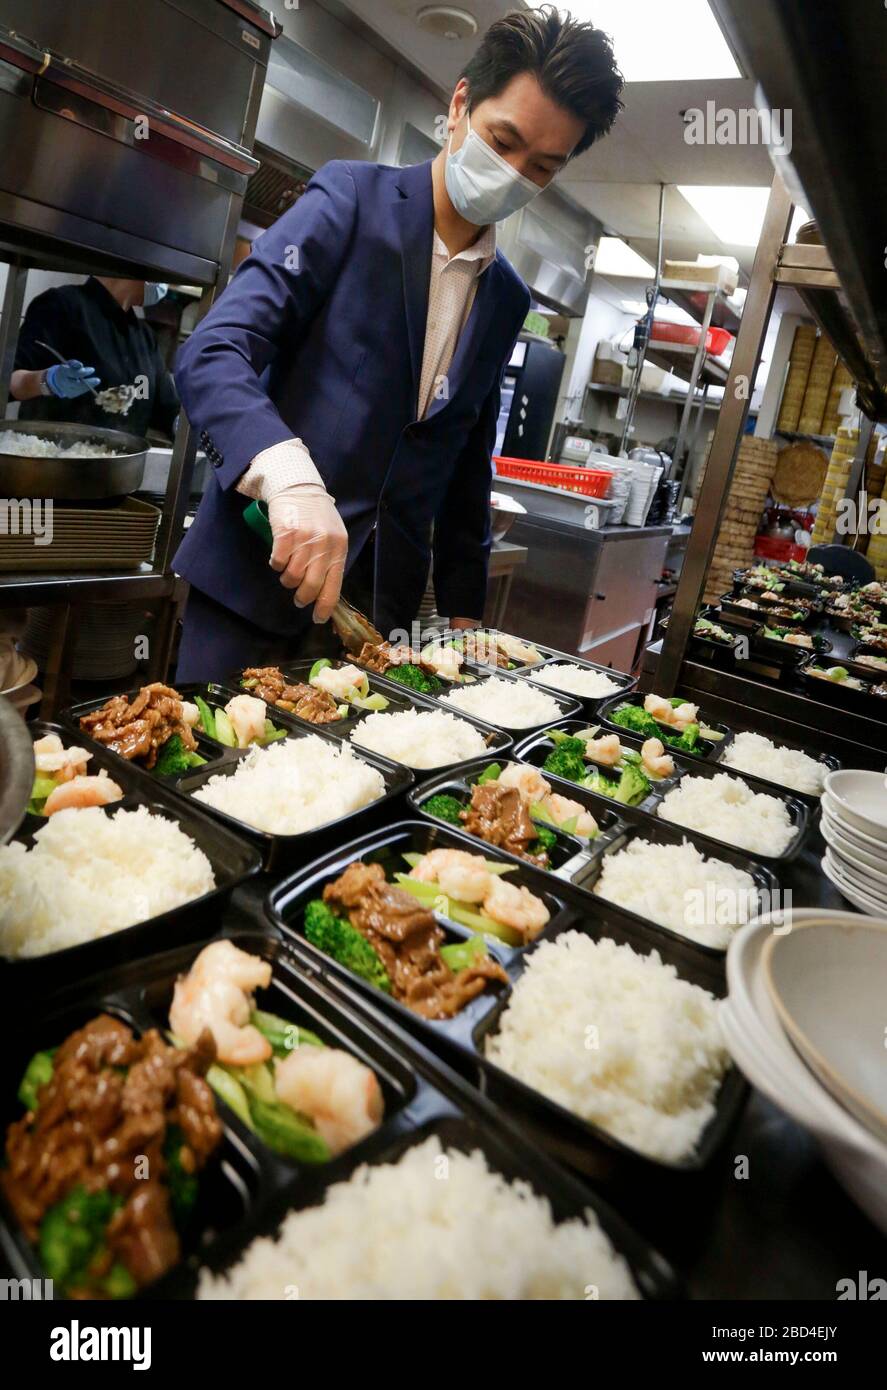 Vancouver, Canada. 6th Apr, 2020. A staff member of a Chinese restaurant prepares meal boxes inside the kitchen for the frontline workers of Vancouver General Hospital in Vancouver, Canada, April 6, 2020. The Canadian government is recruiting volunteers to support frontline healthcare workers to combat the COVID-19 crisis. Some local Chinese restaurants donated meals to the frontline healthcare workers fighting COVID-19. Credit: Liang Sen/Xinhua/Alamy Live News Stock Photo